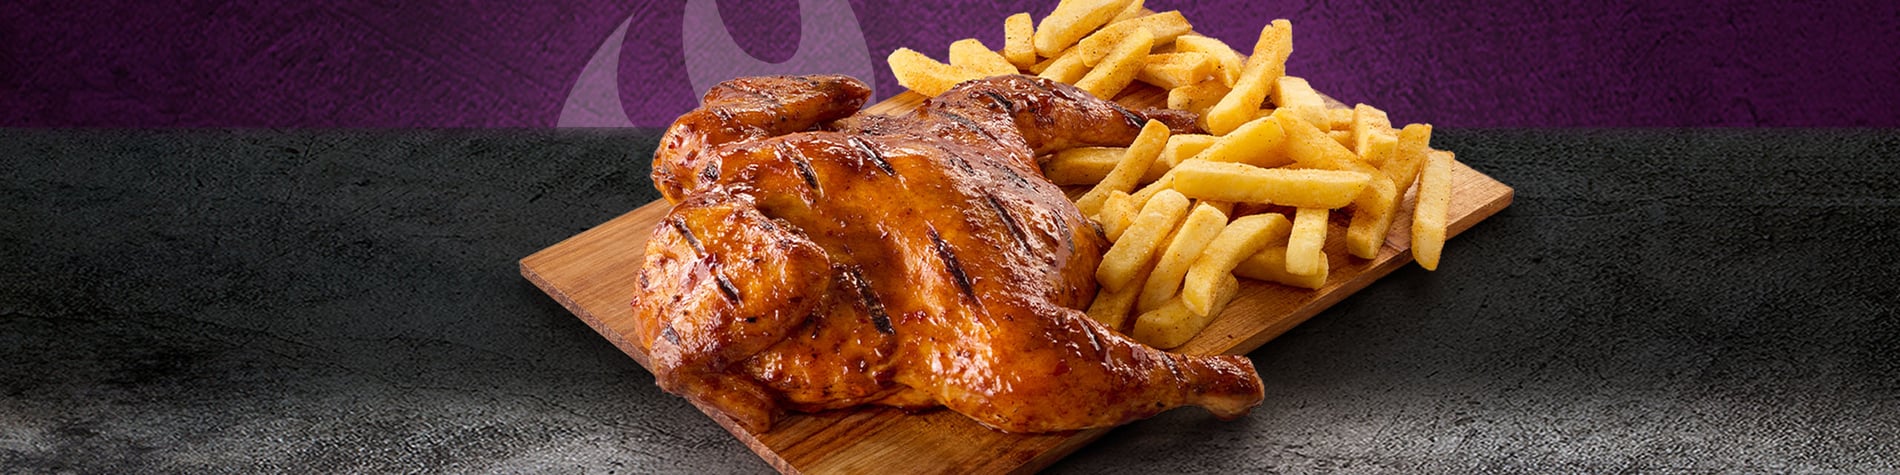 Grilled Chicken and chips on a board